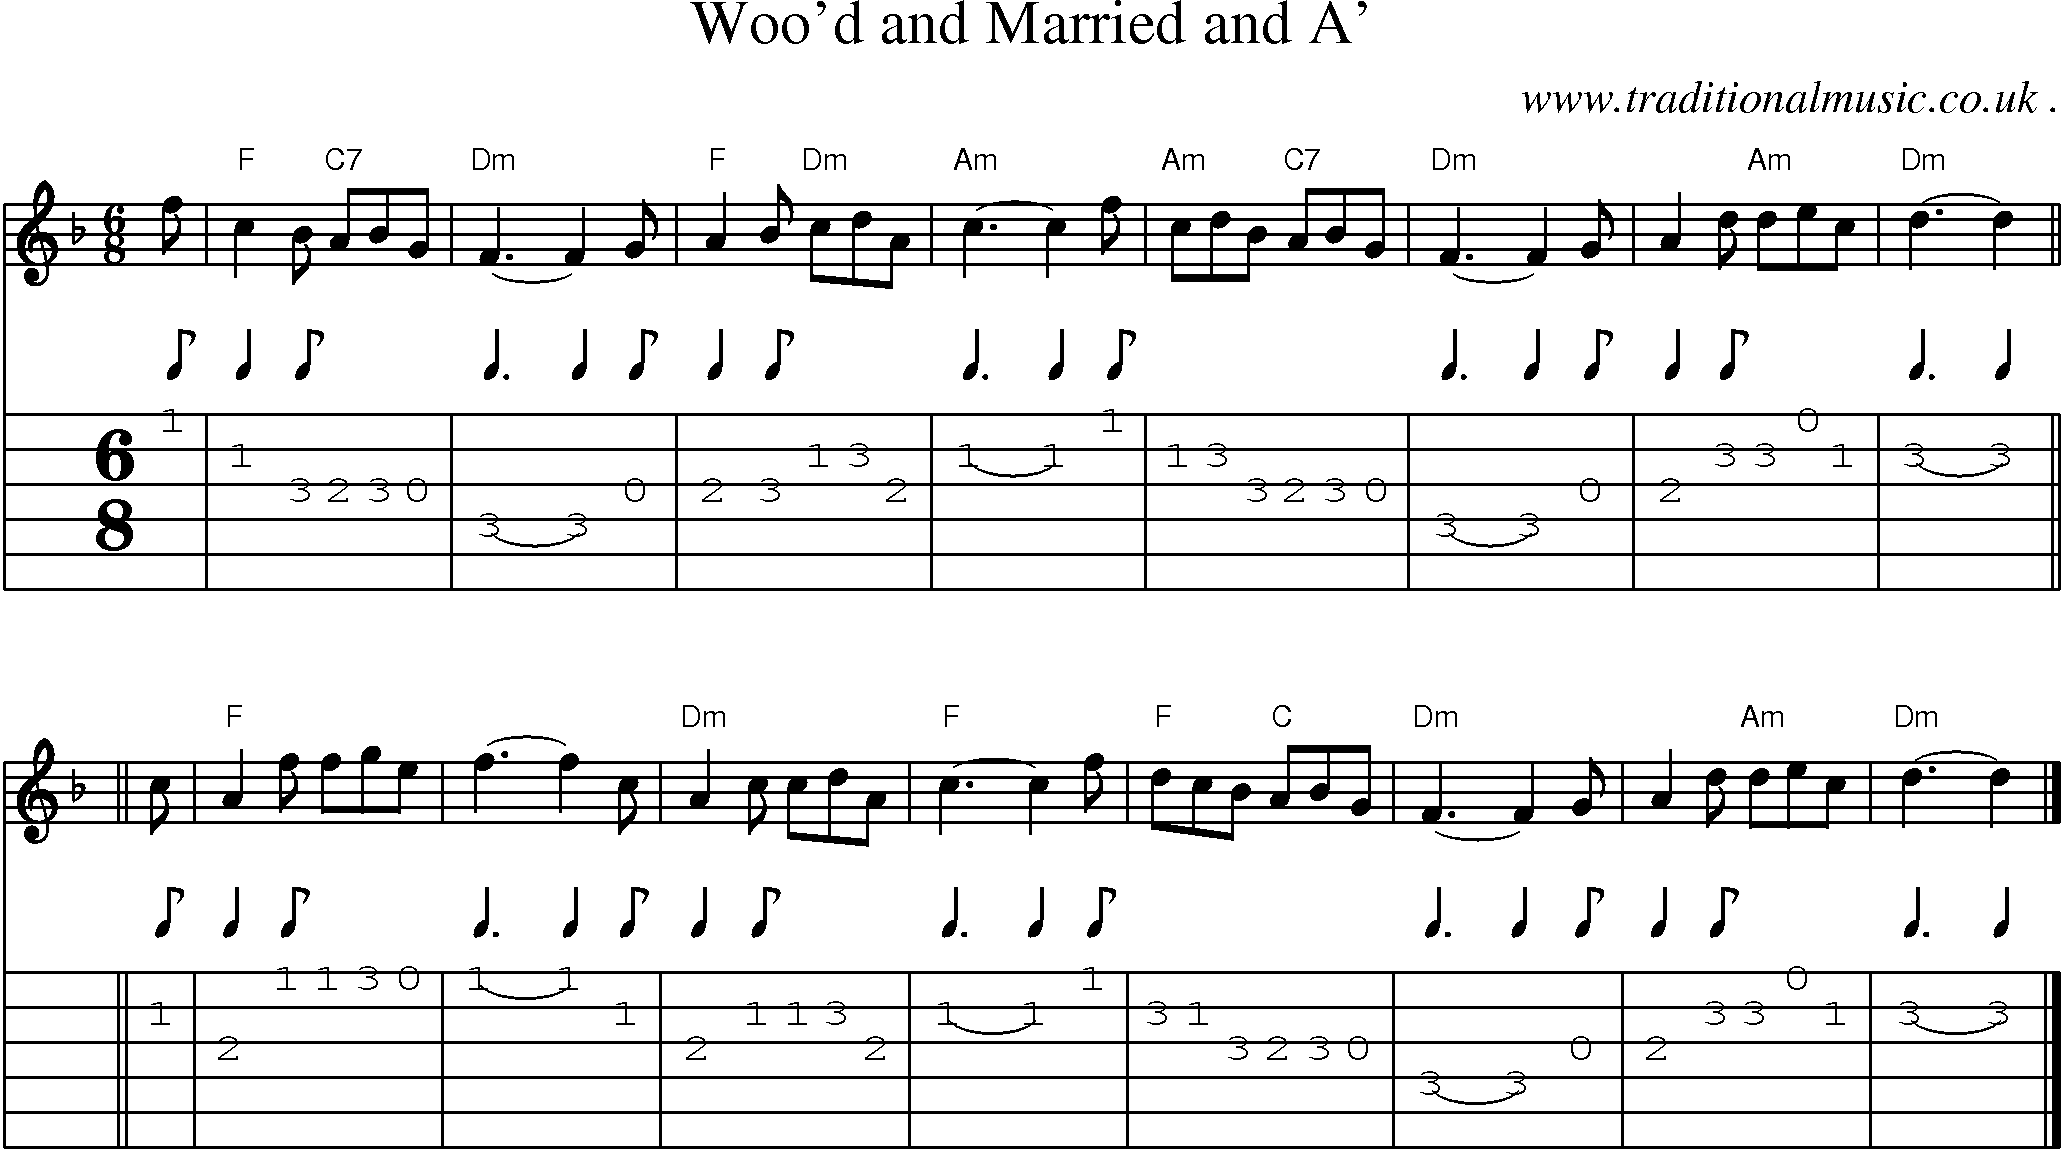 Sheet-music  score, Chords and Guitar Tabs for Wood And Married And A